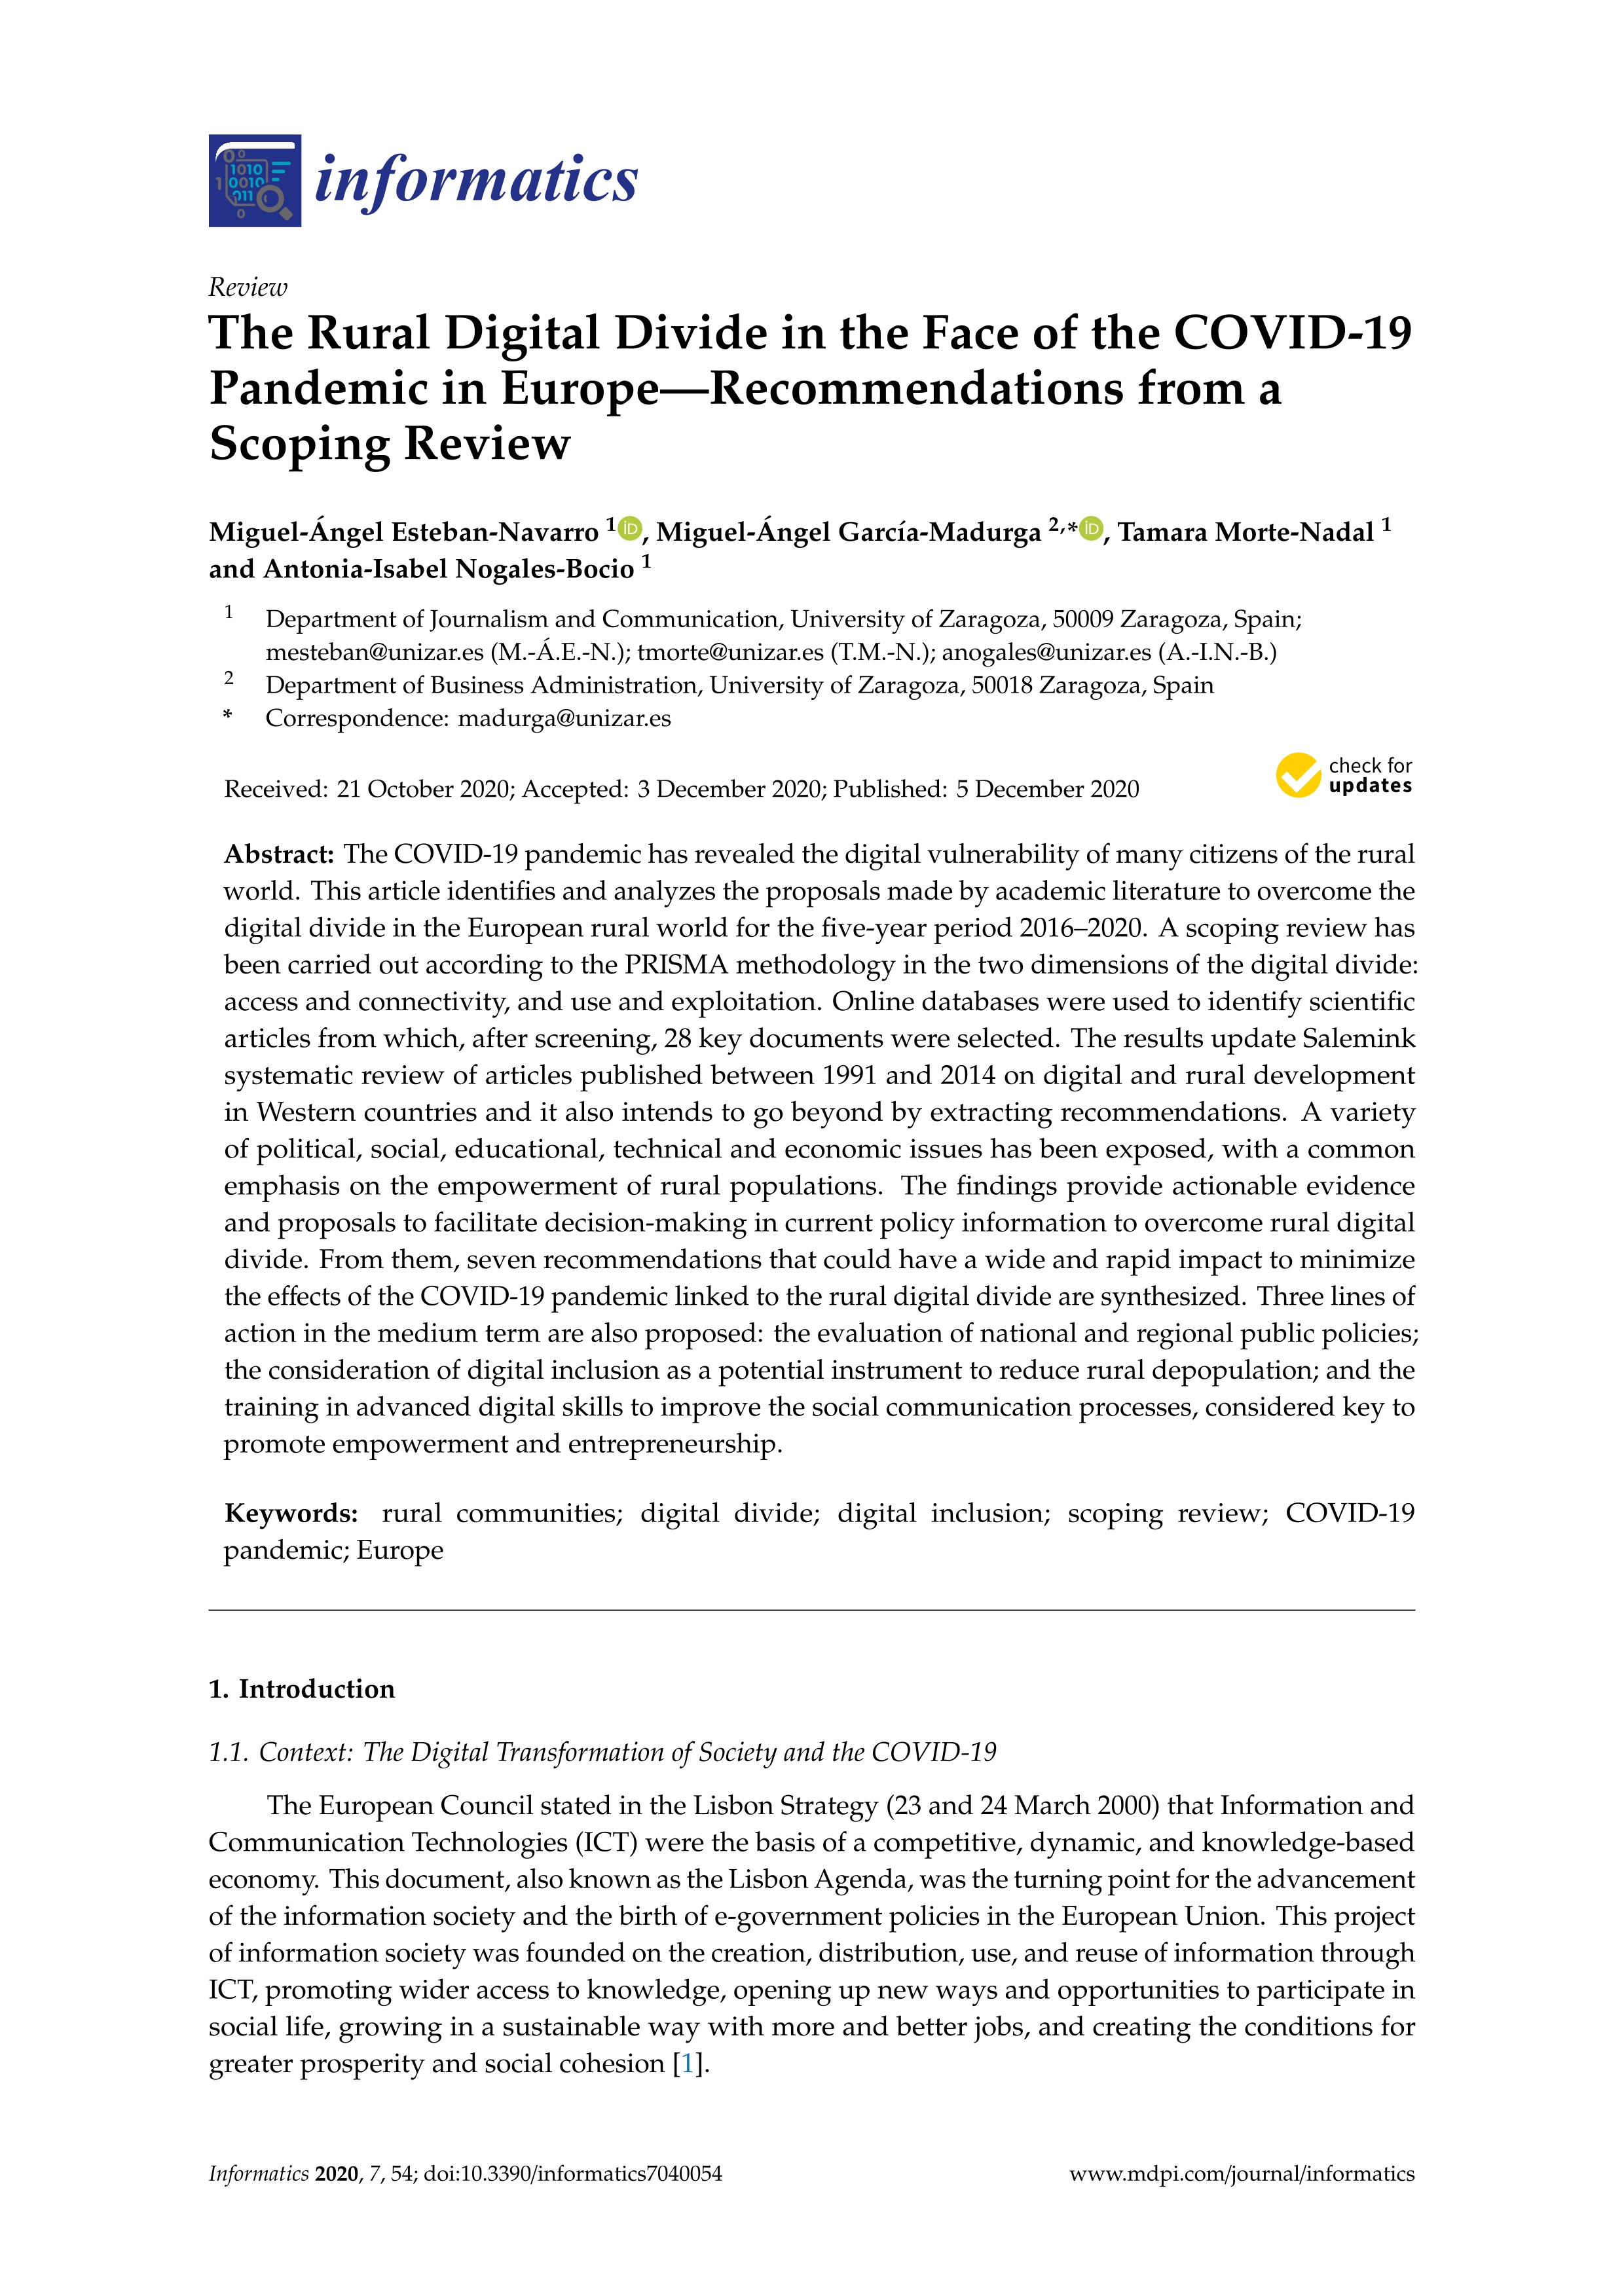 The Rural Digital Divide In The Face Of The Covid 19 Pandemic In Europe Recommendations From A Scoping Review Universidad De Zaragoza Repository